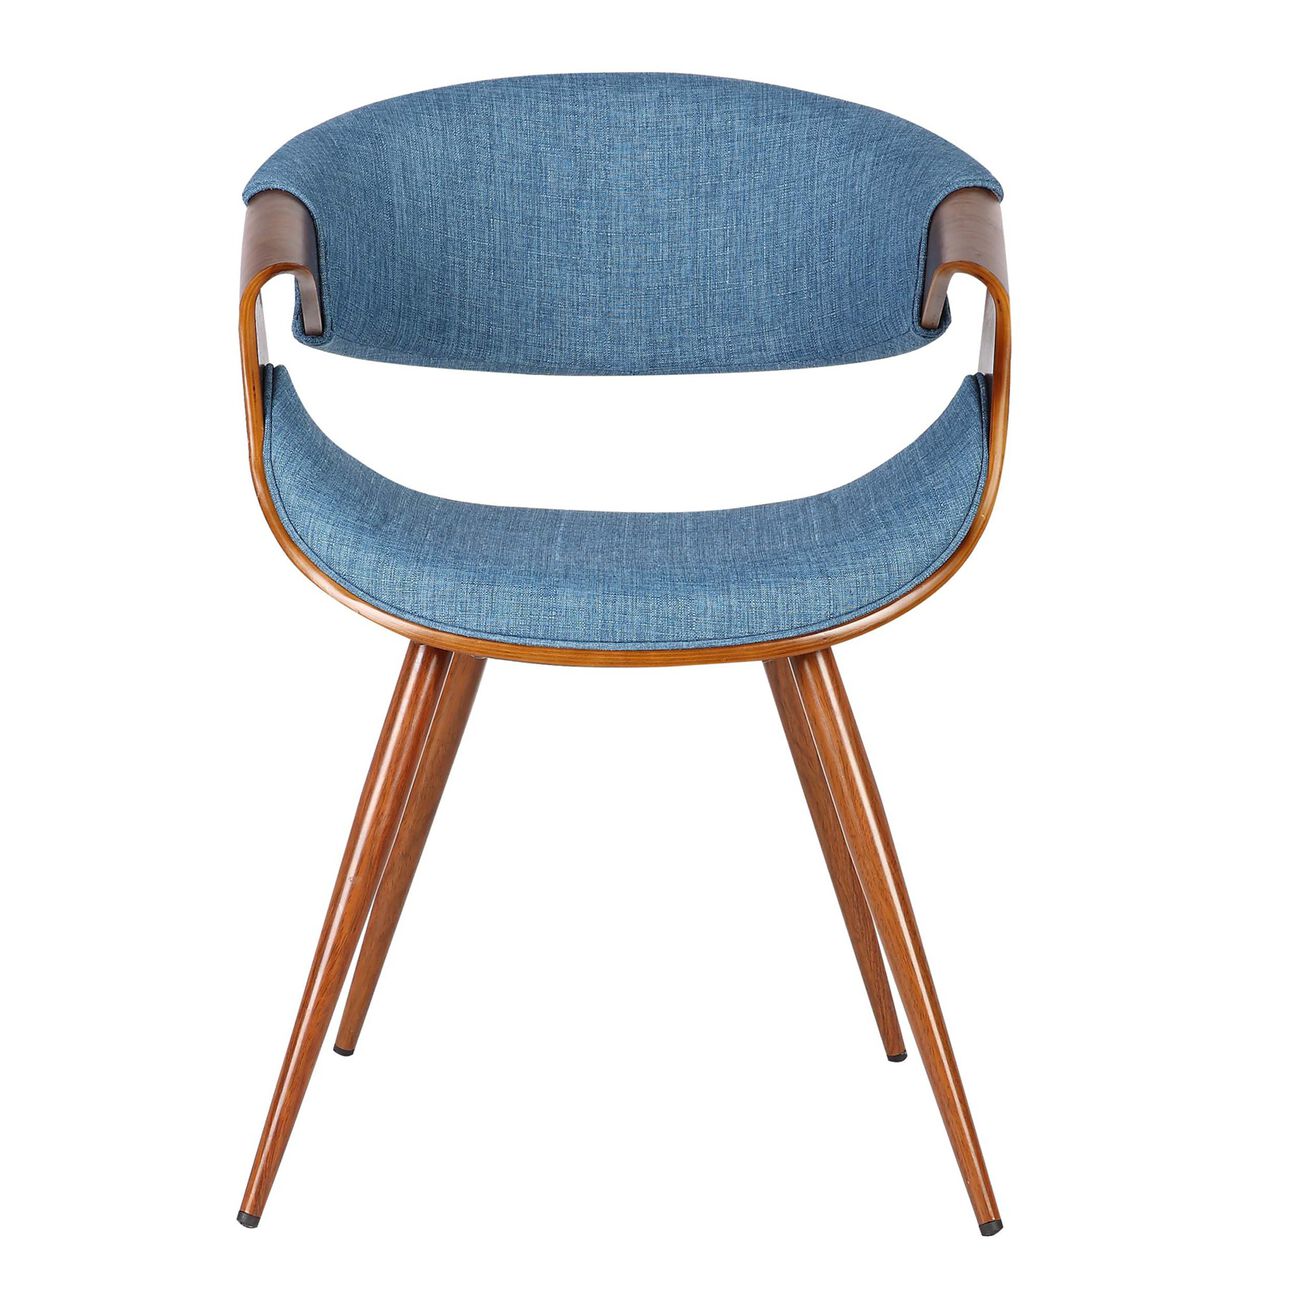 Curved Back Fabric Dining Chair with Round Tapered Legs, Brown and Blue